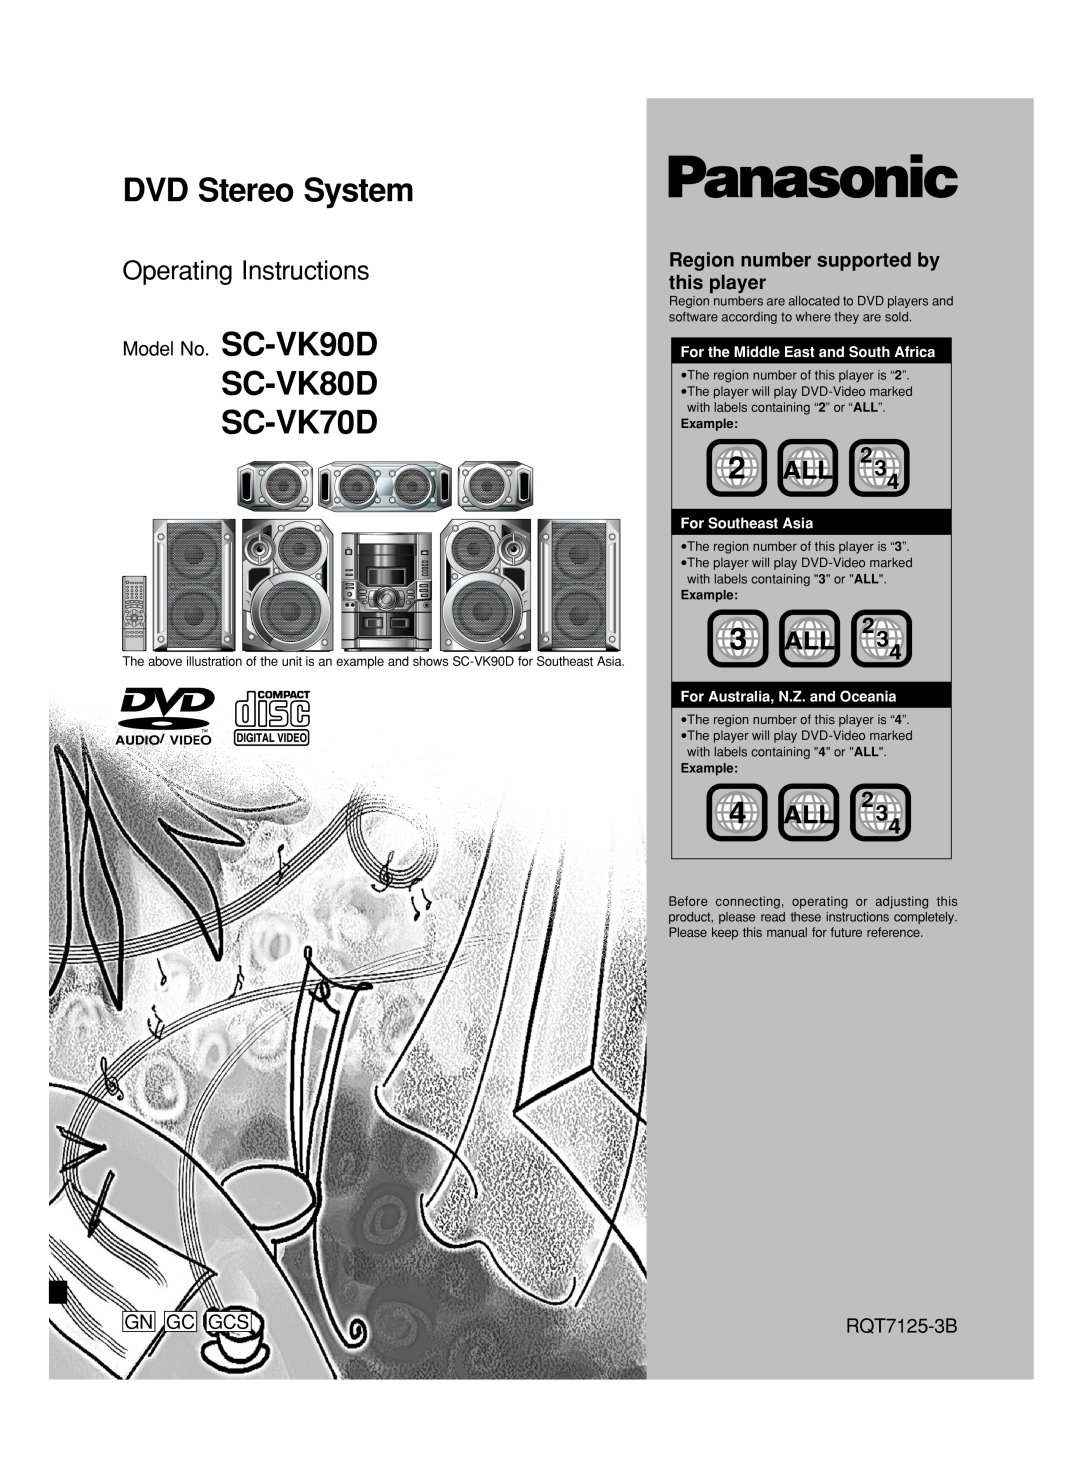 Panasonic SC-VK80D operating instructions 2234, Model No. SC-VK90D, Gngcgcs, Region number supported by this player 